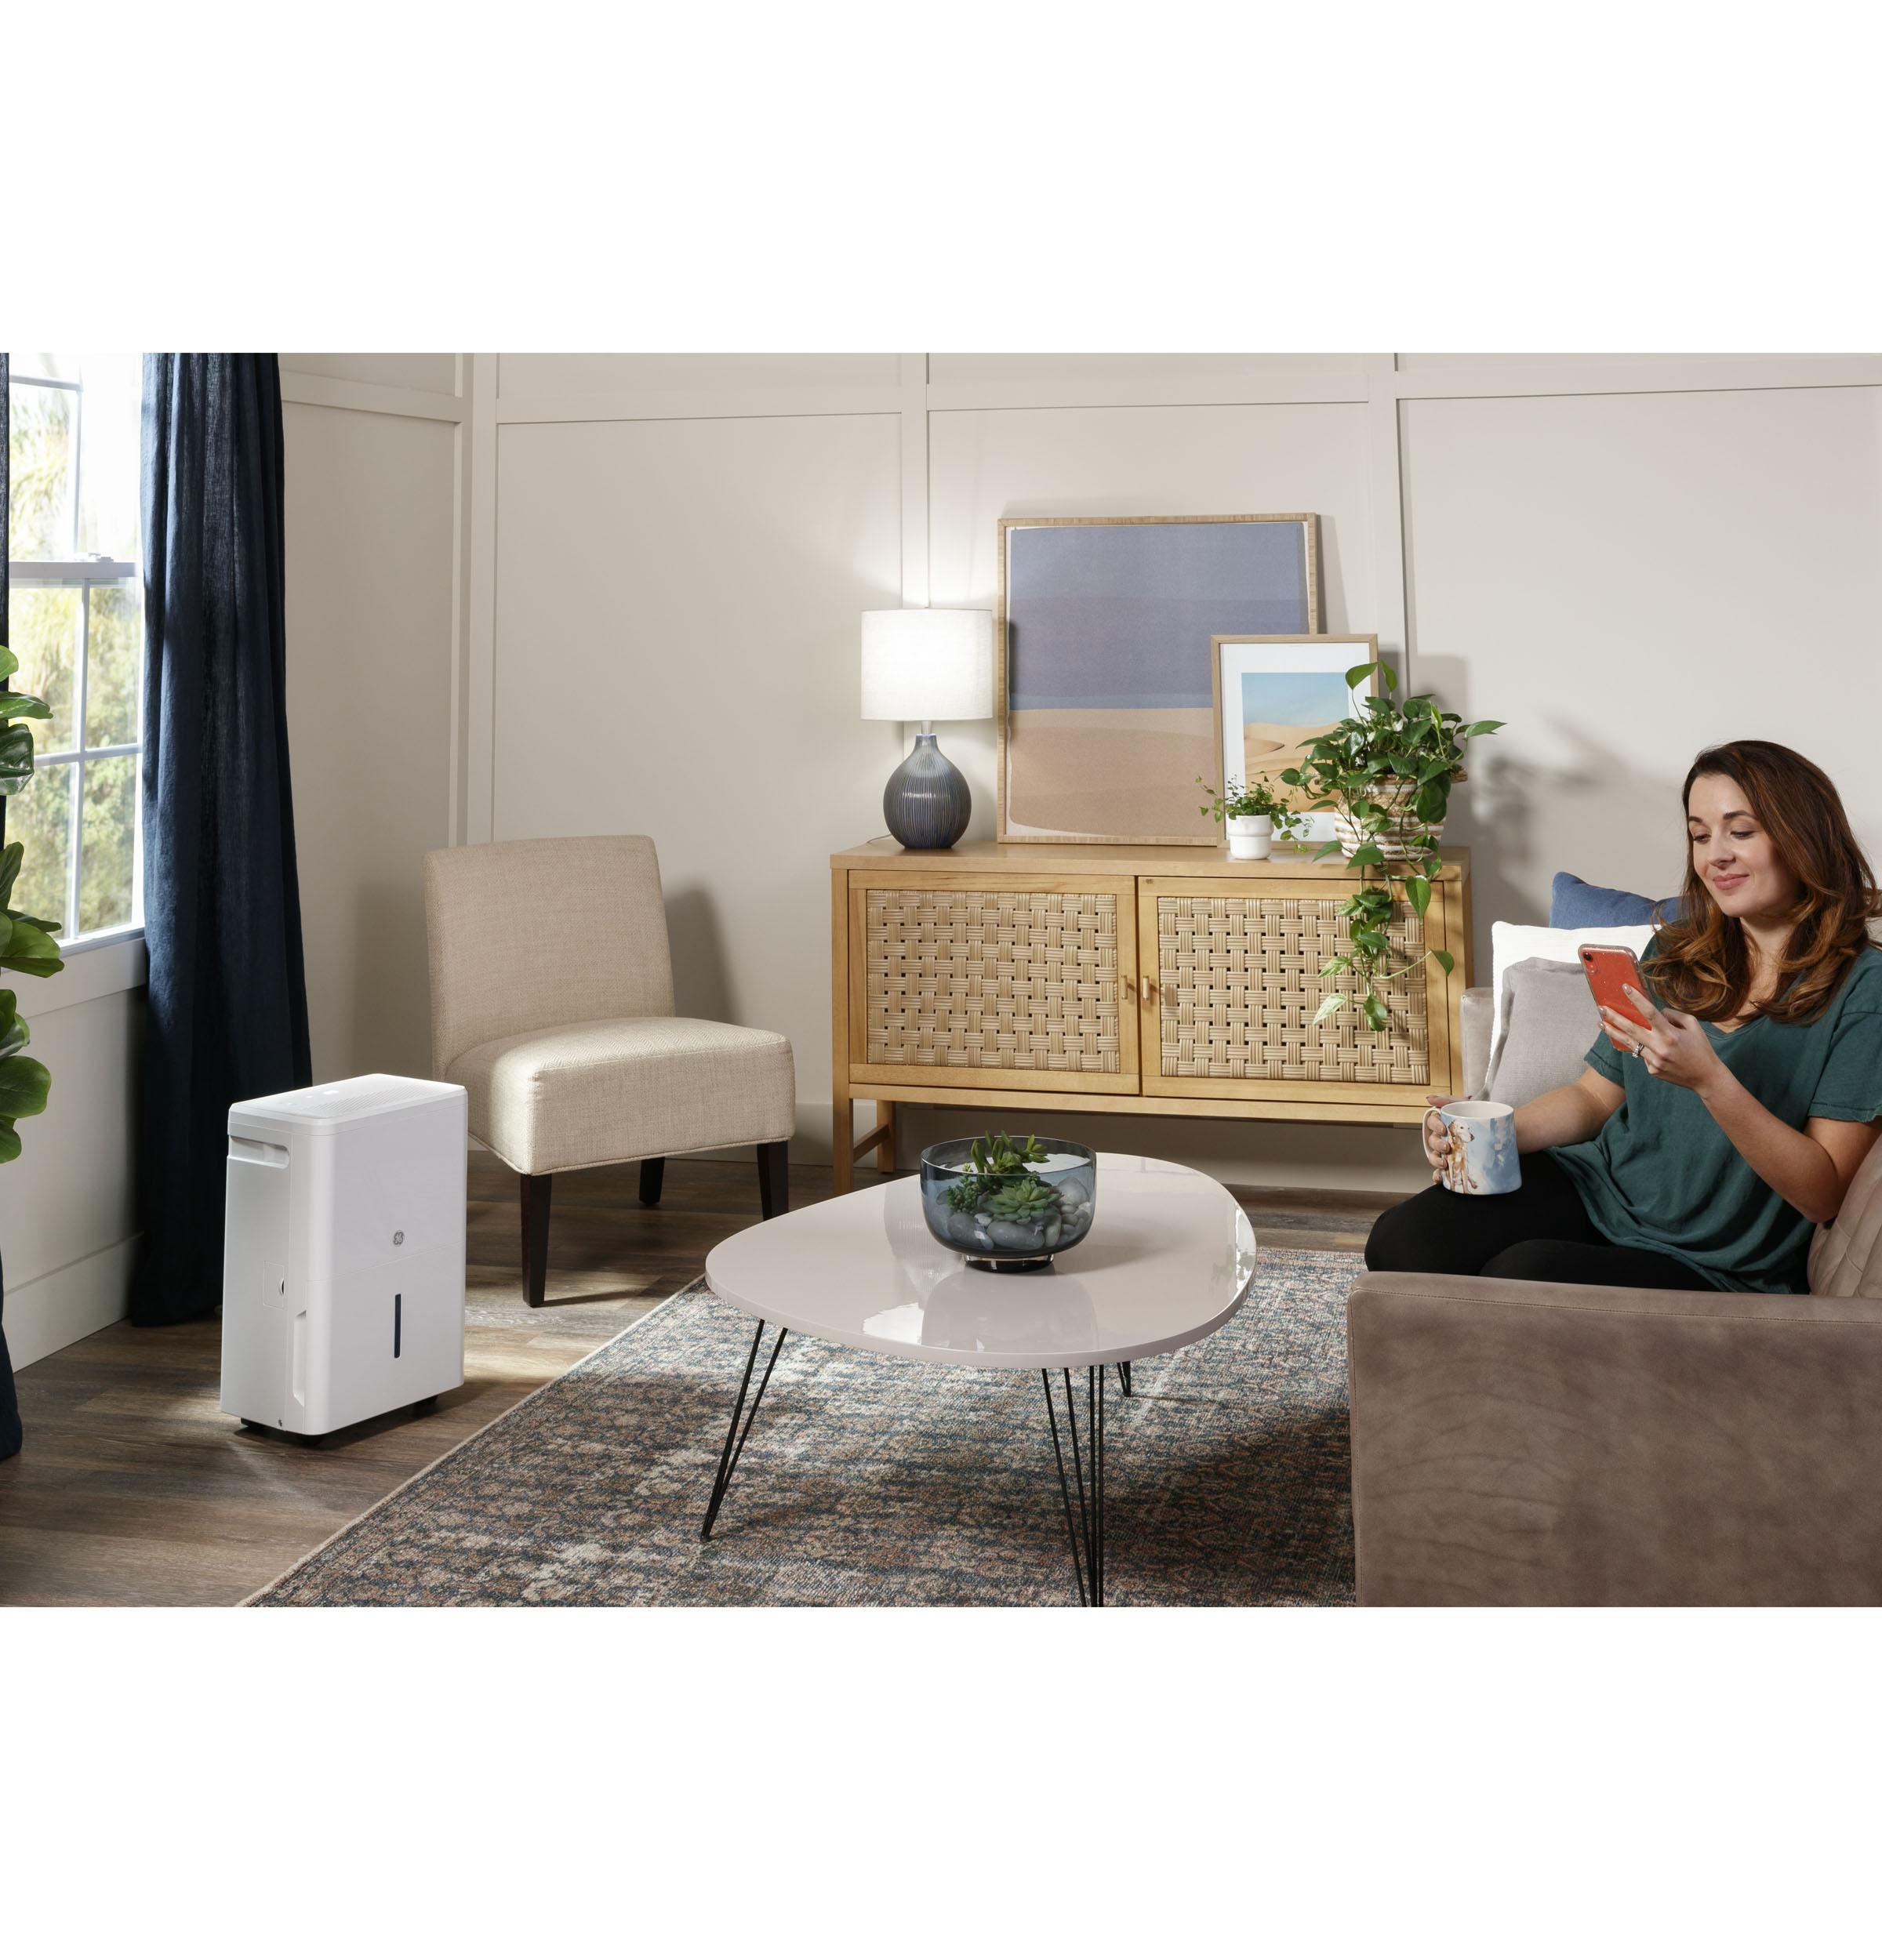 Ge Appliances ADHR22LB Ge® 22 Pint Energy Star® Portable Dehumidifier With Smart Dry For Damp Spaces